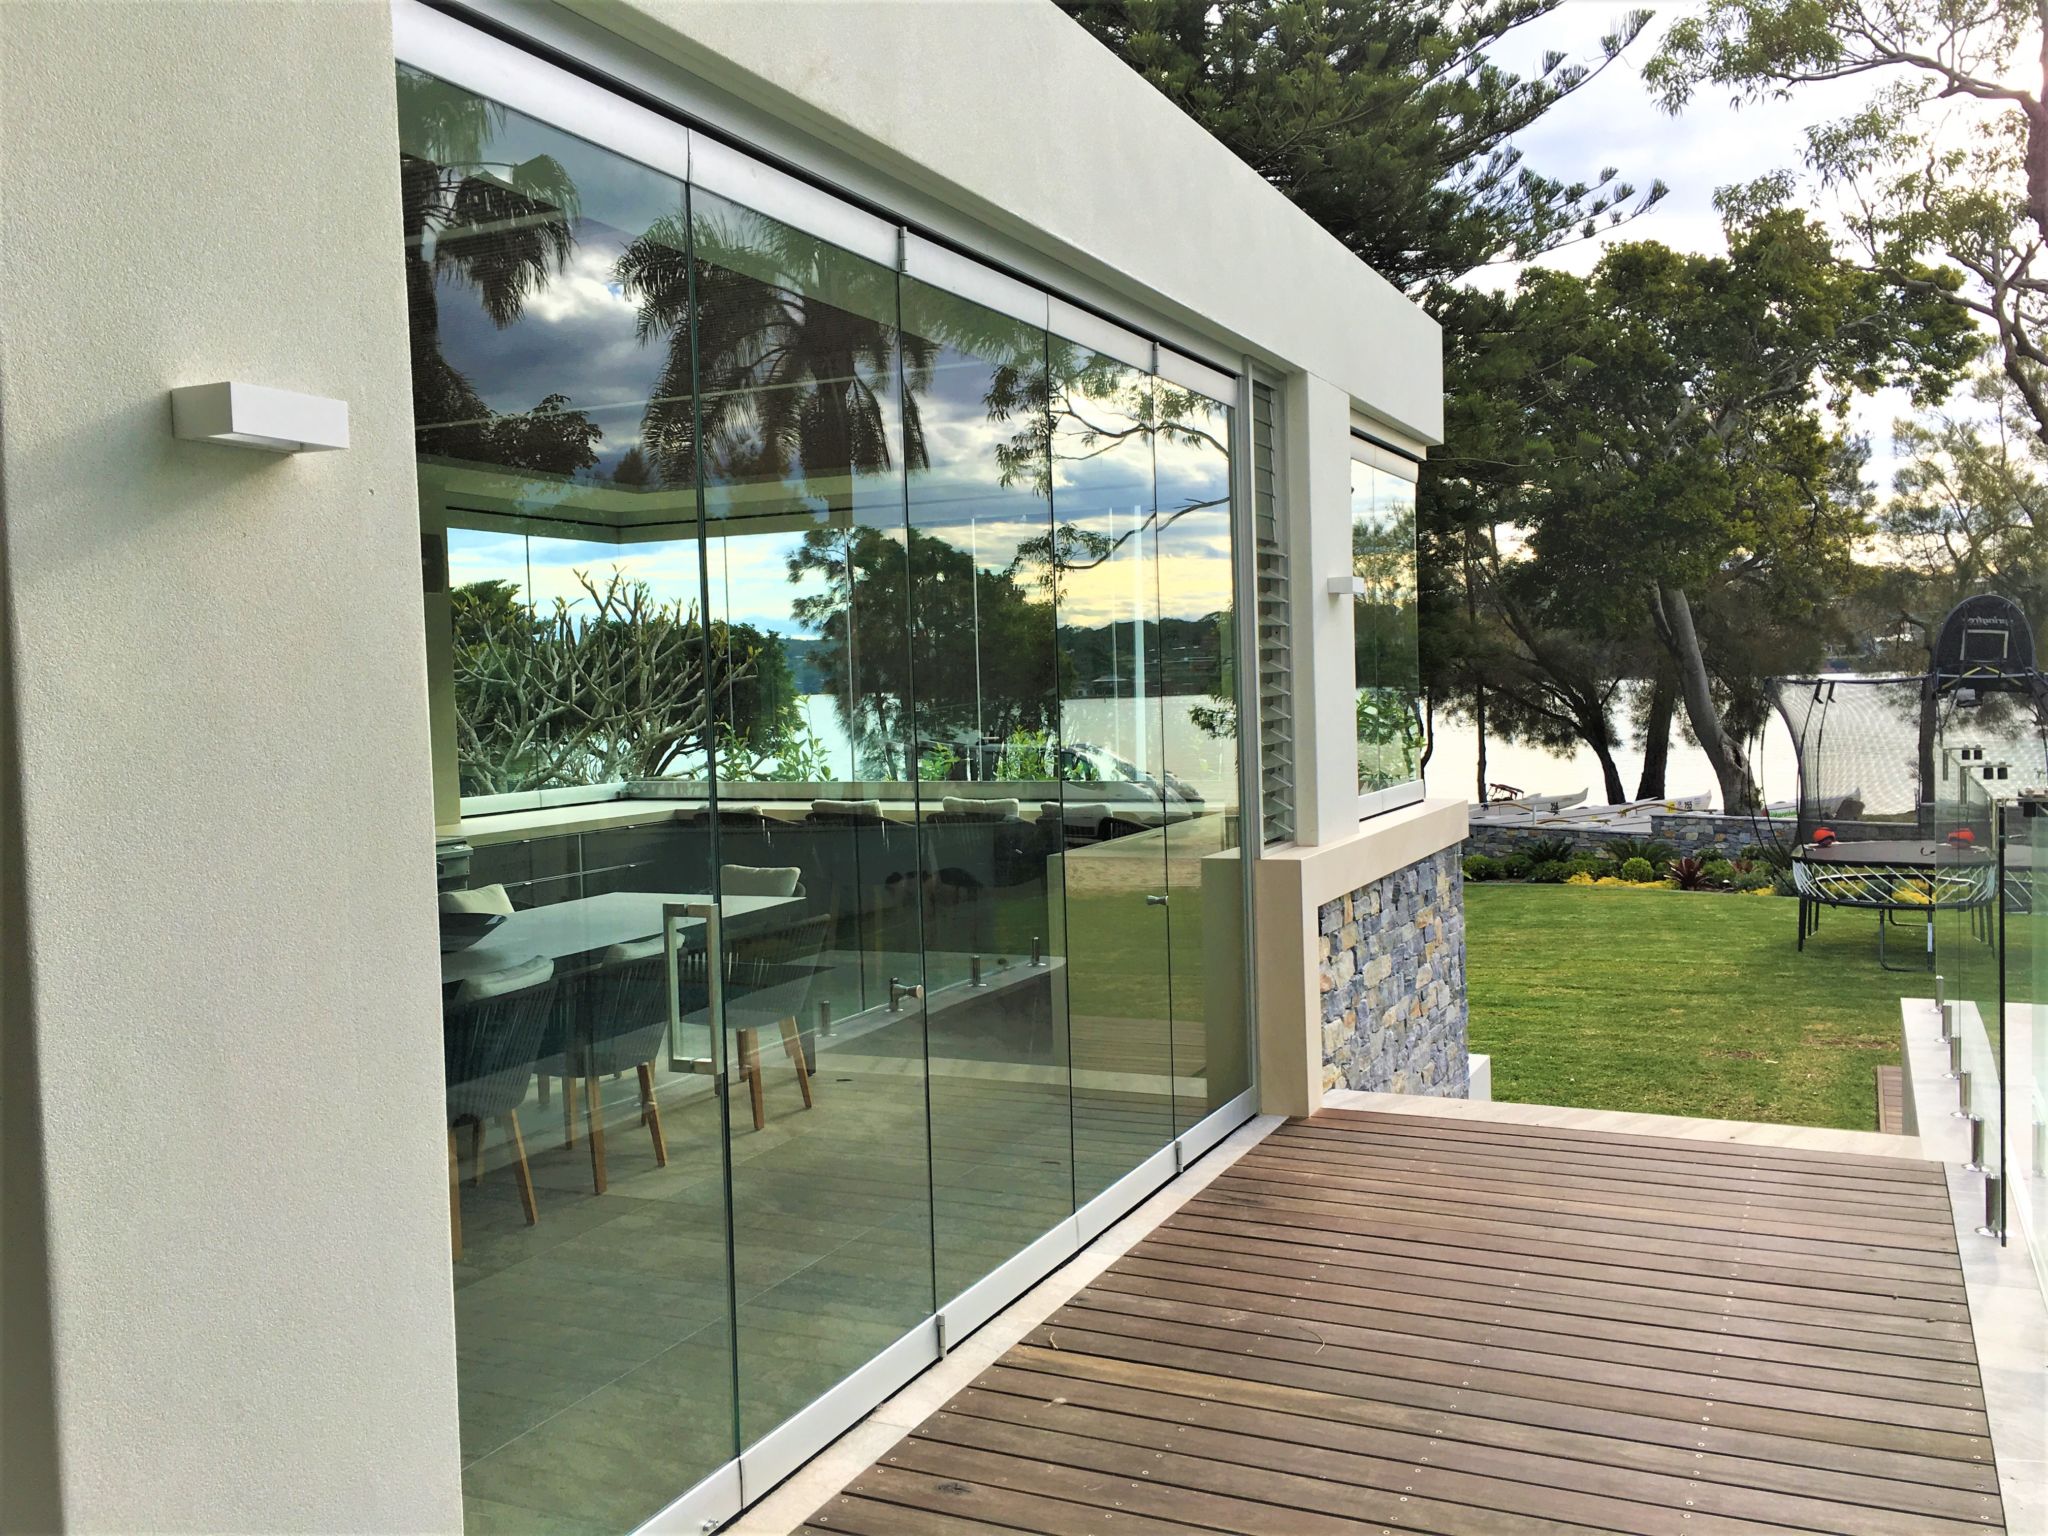 Frameless Glass Walls Residential Murano Glass And Folding Walls